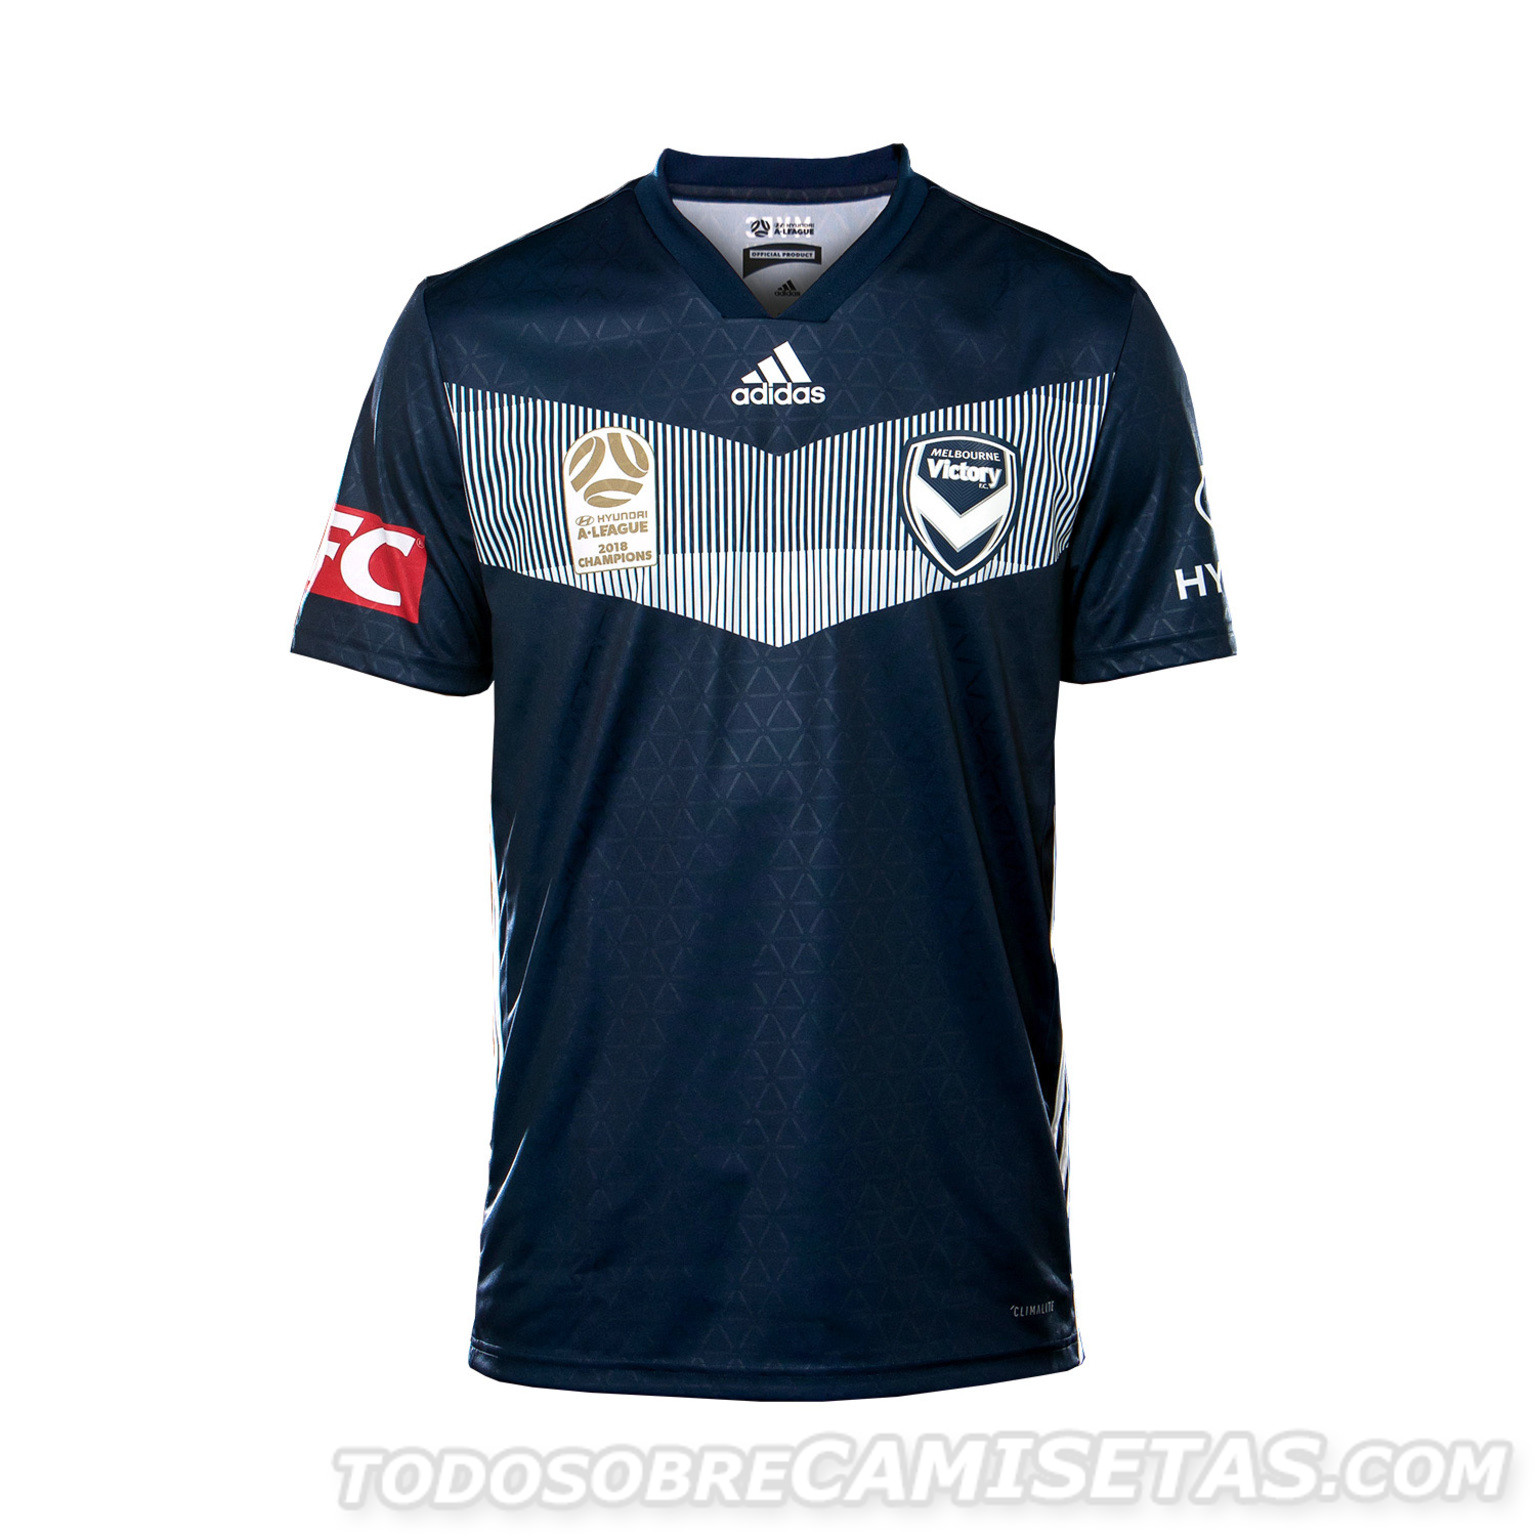 Melbourne Victory adidas Home Kit 2018-19